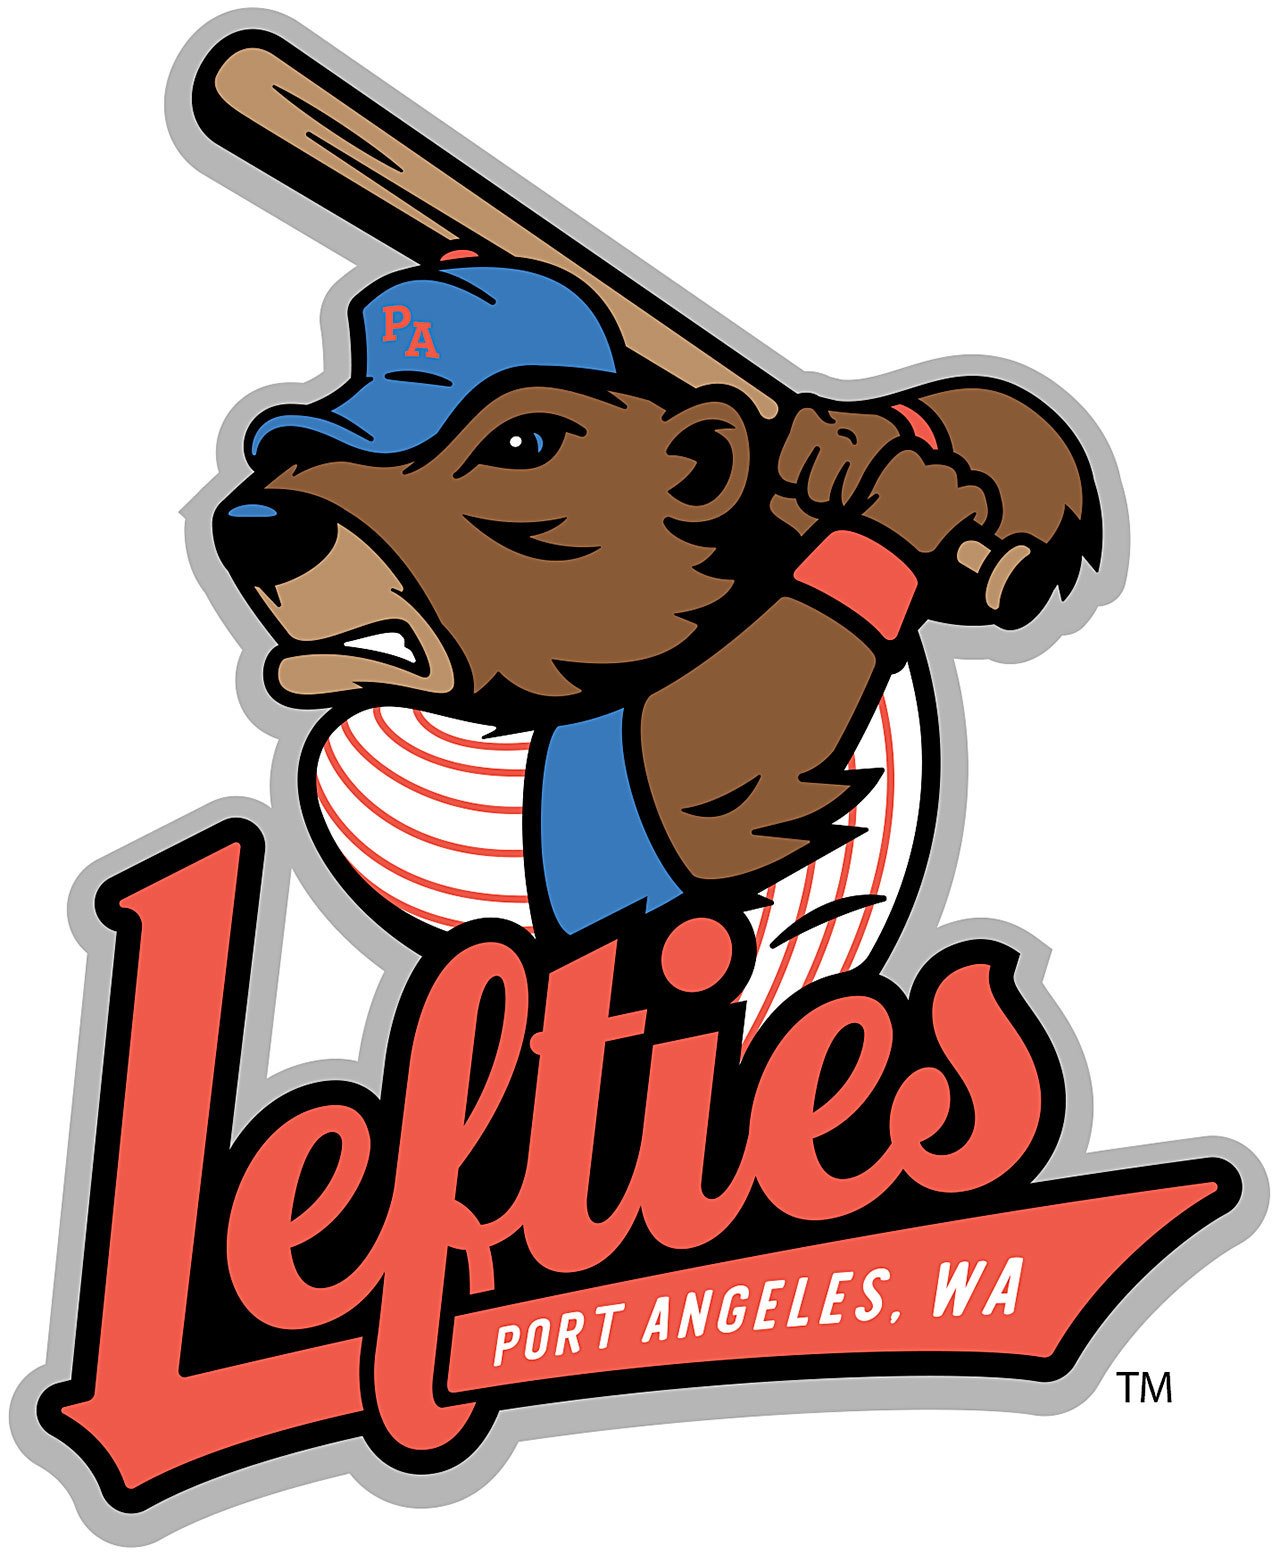 Port Angeles Lefties The Port Angeles Lefties released its primary logo, featuring Timber, a native Olympic Marmot, Wednesday.